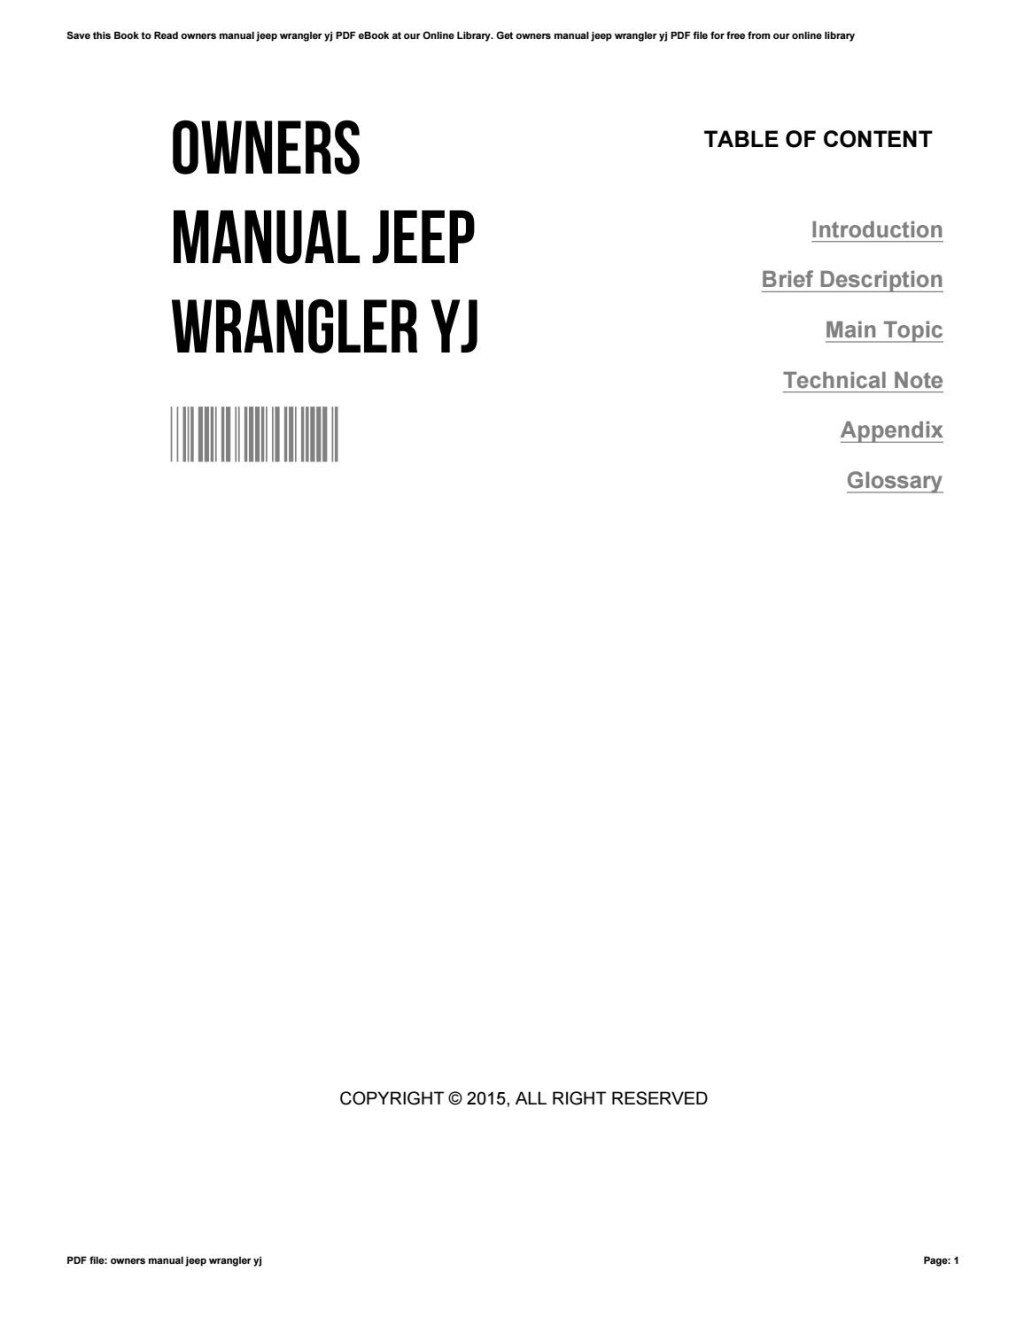 Picture of: Owners manual jeep wrangler yj by MarkHarris – Issuu